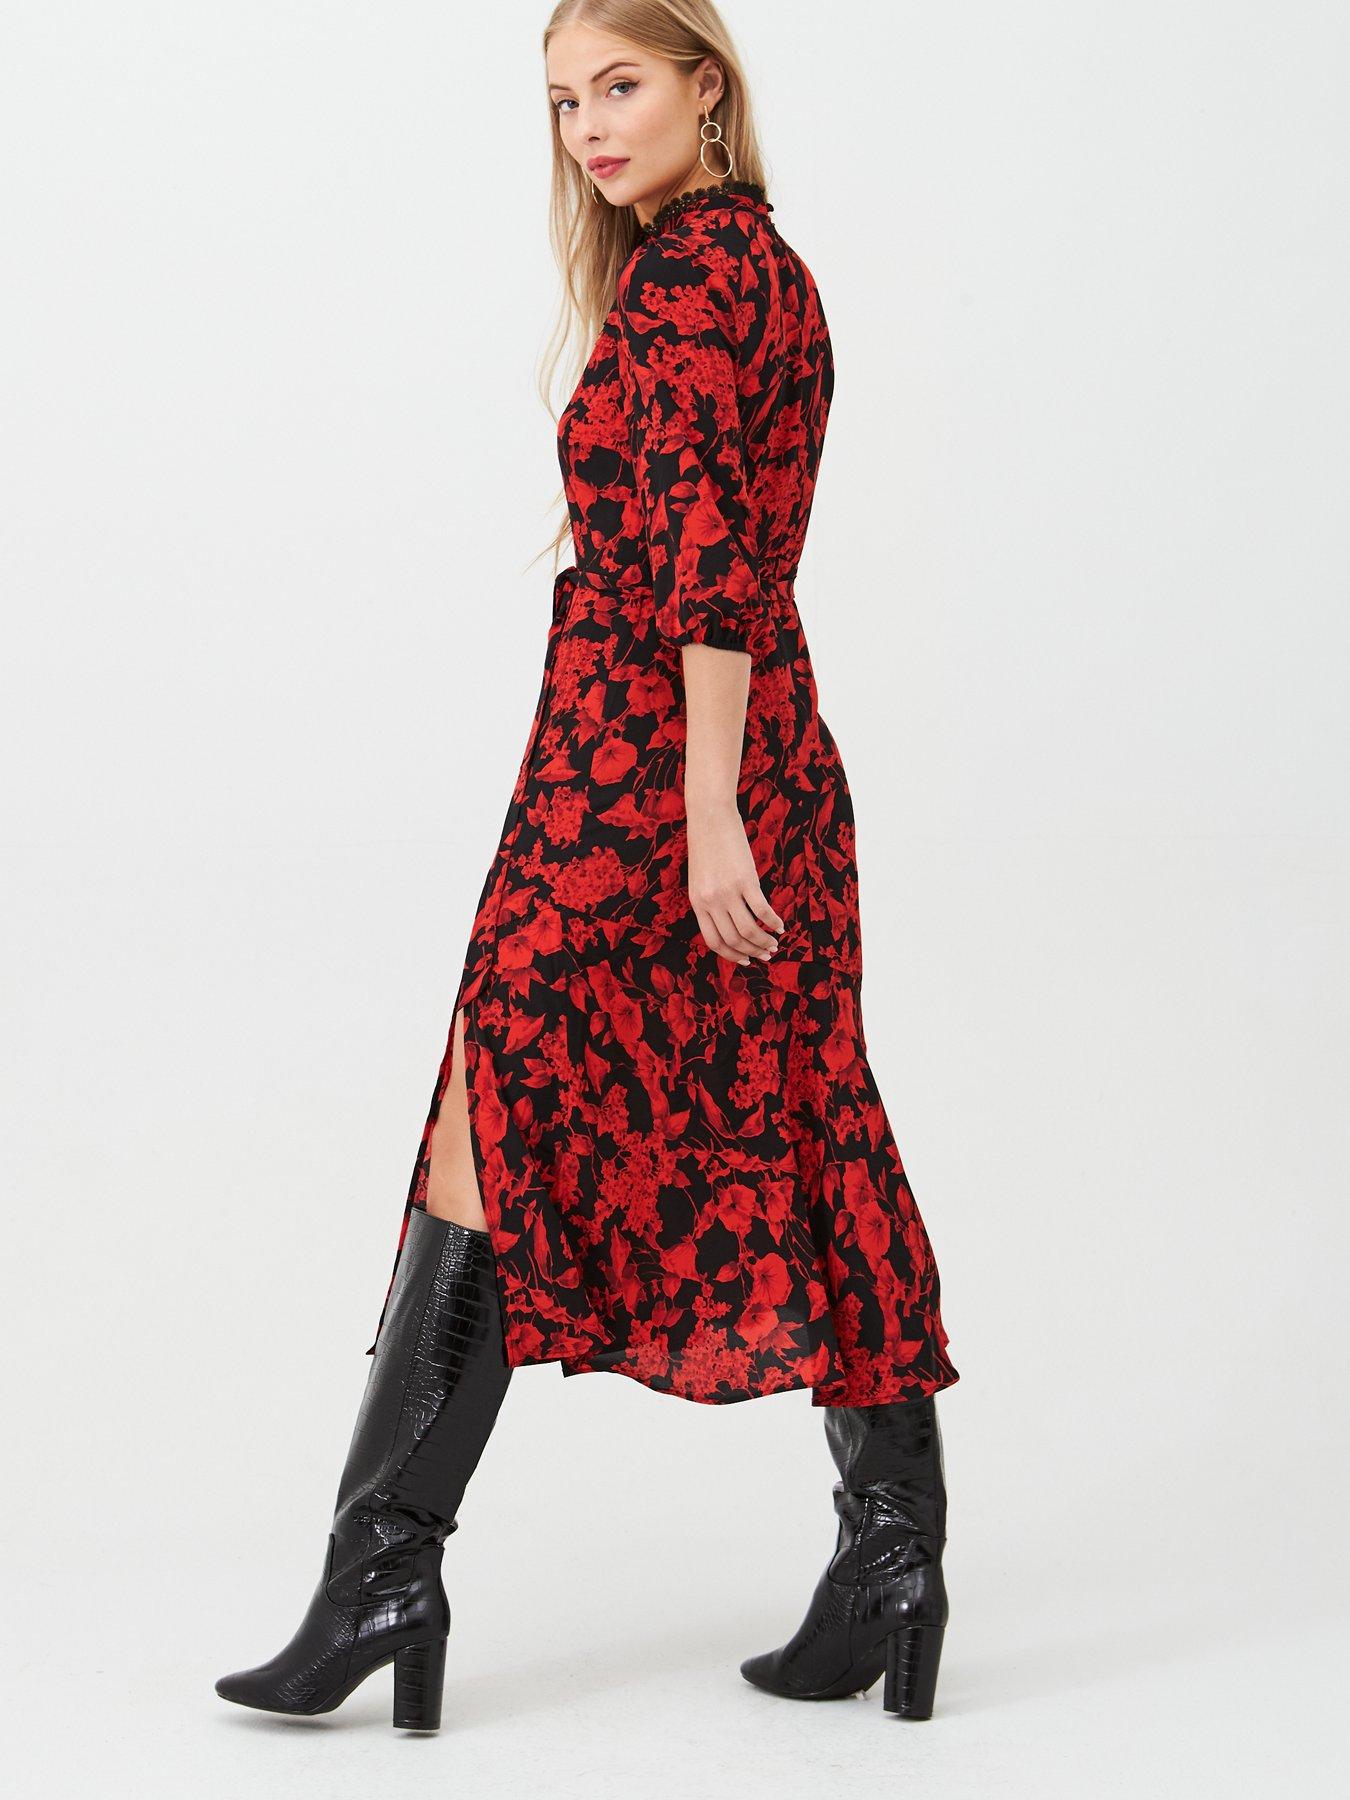 shadow floral dress oasis